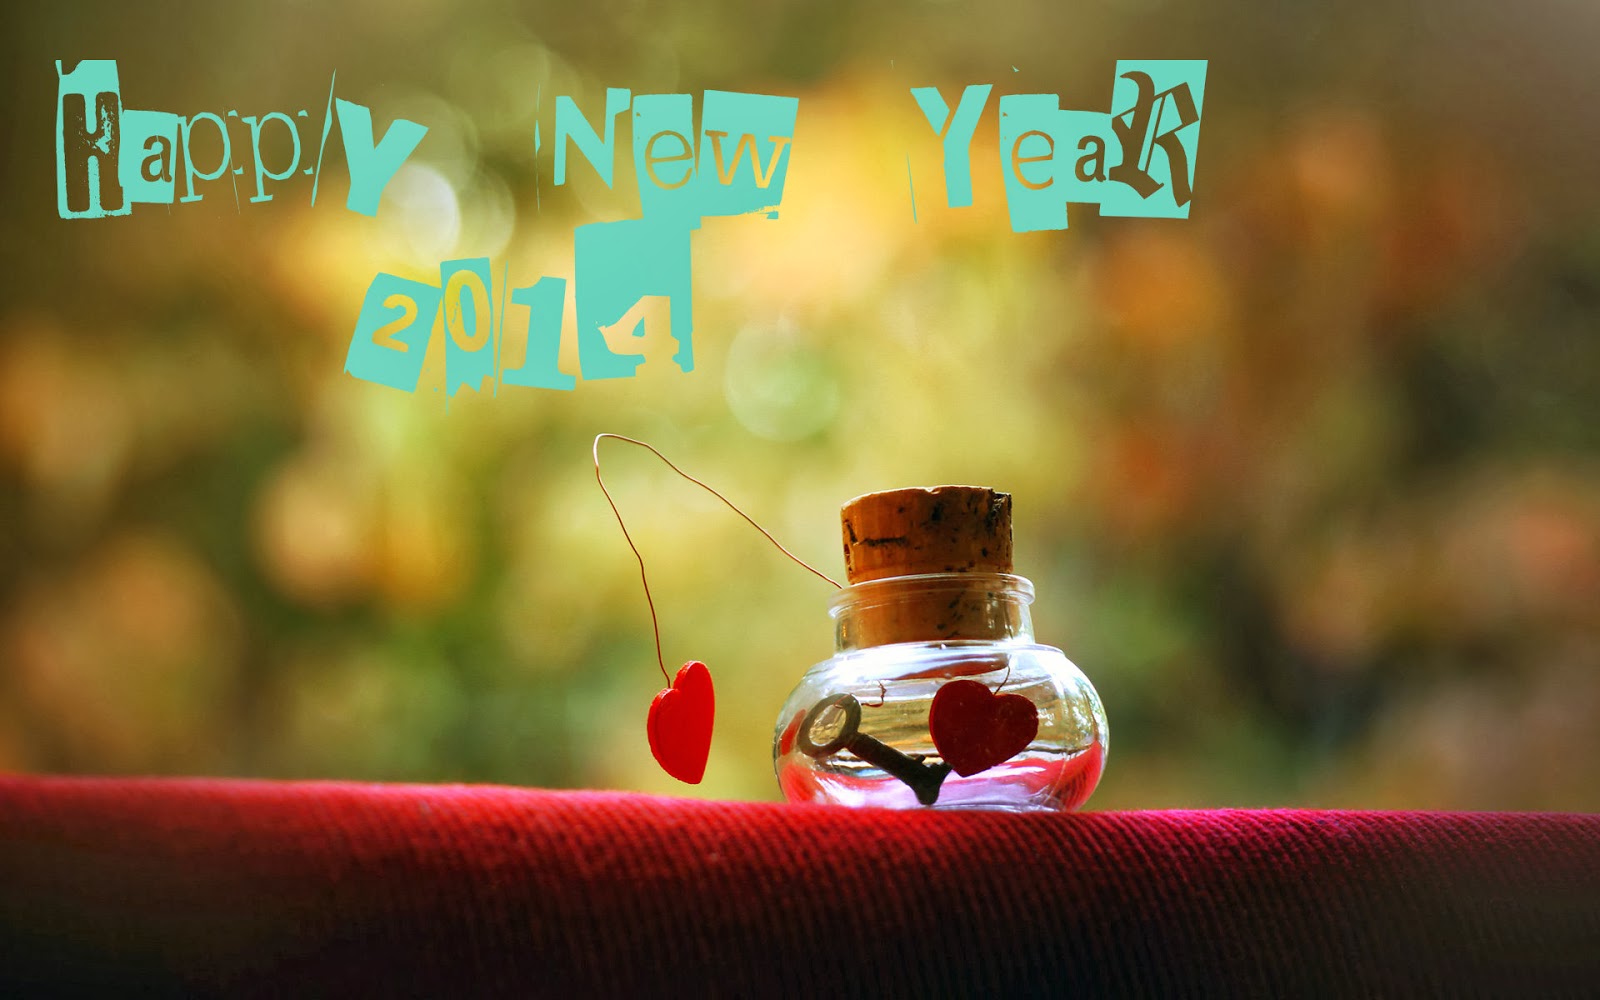 Happy new year wallpaper, new year wallpaper 2013: Victoria Wallpapers ...